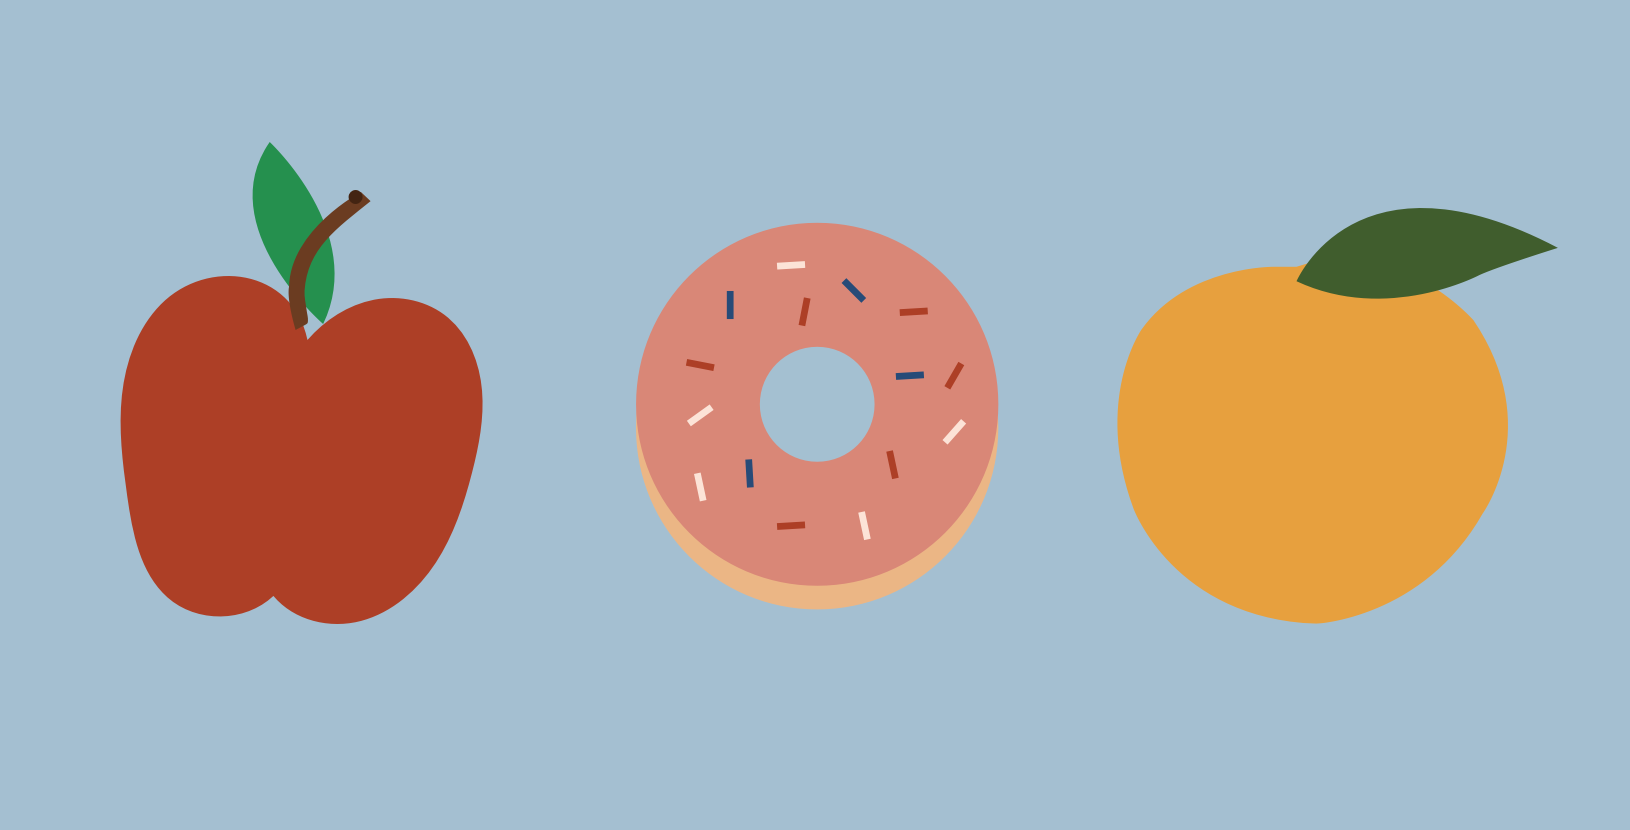 How to get better sleep: An apple, doughnut and peach. Healthy, light food choices before bed can help you sleep better.